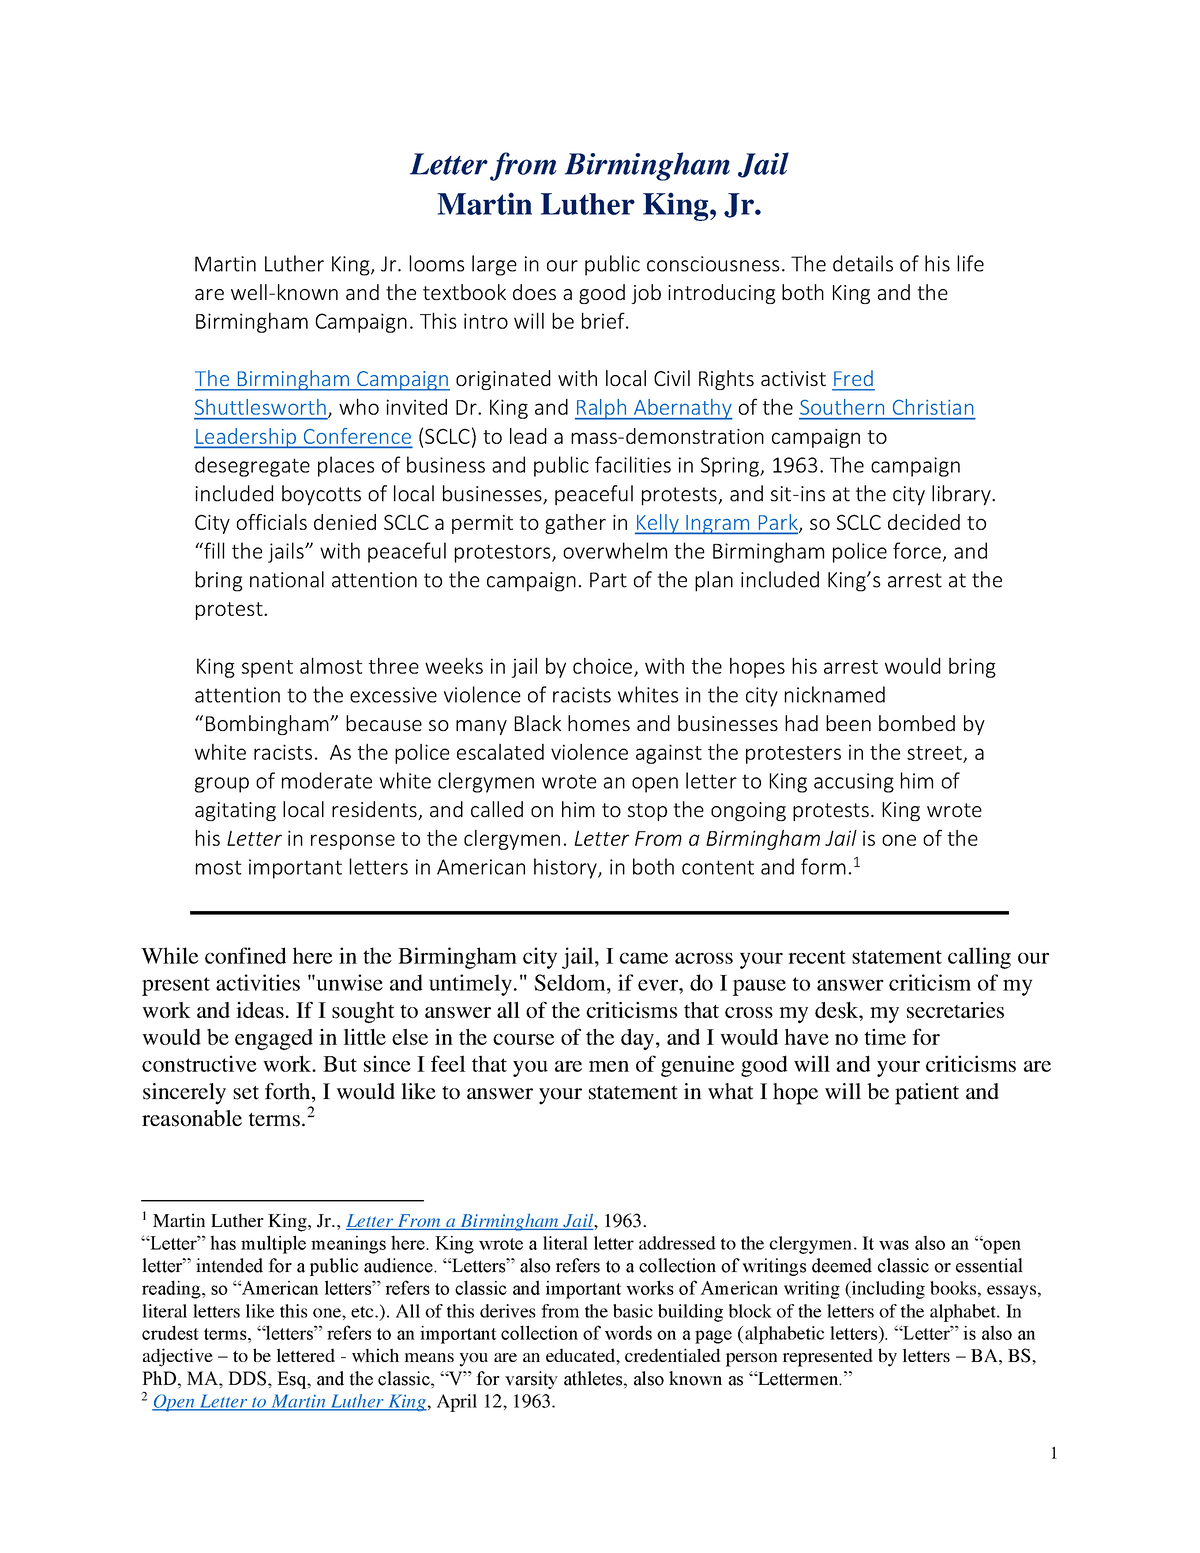 martin-luther-king-letter-from-a-birmingham-jail-letter-from-birmingham-jail-martin-luther